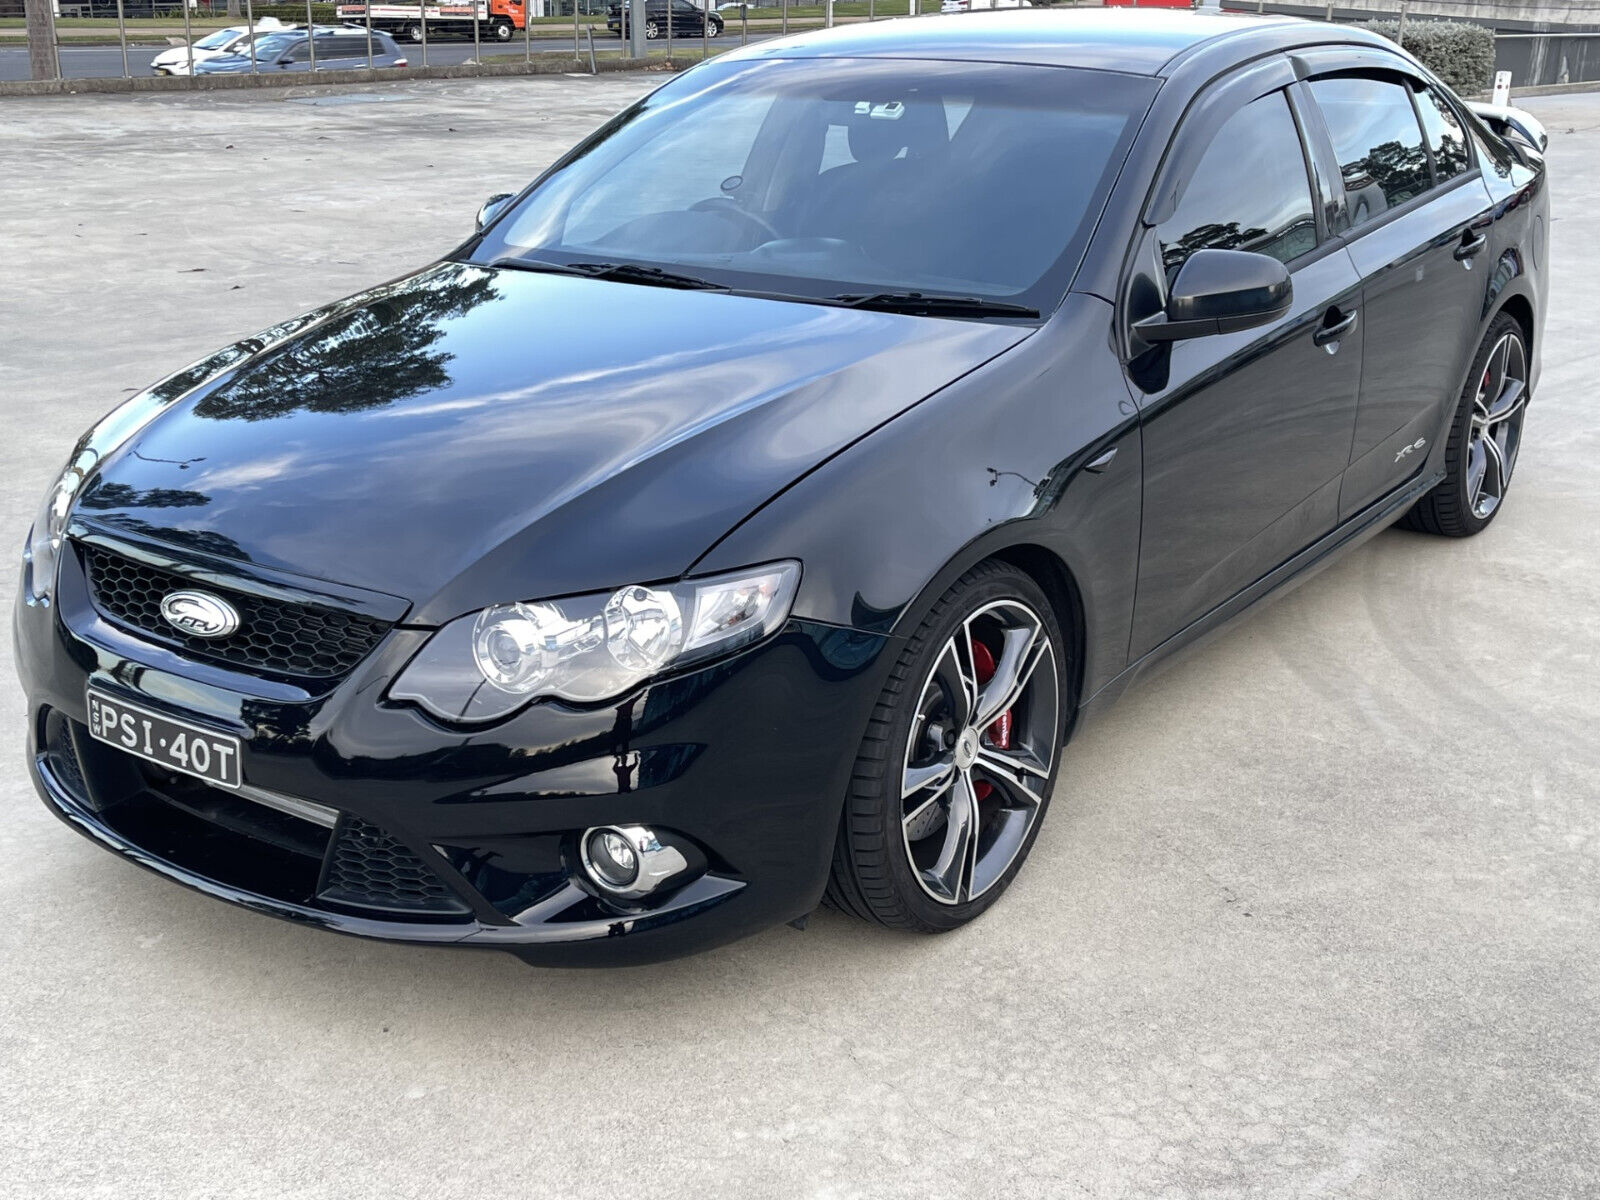 FORD FALCON FG XR6 2009 TURBO AUTO MK1 VERY CLEAN INSIDE OUT DRIVES VERY WELL